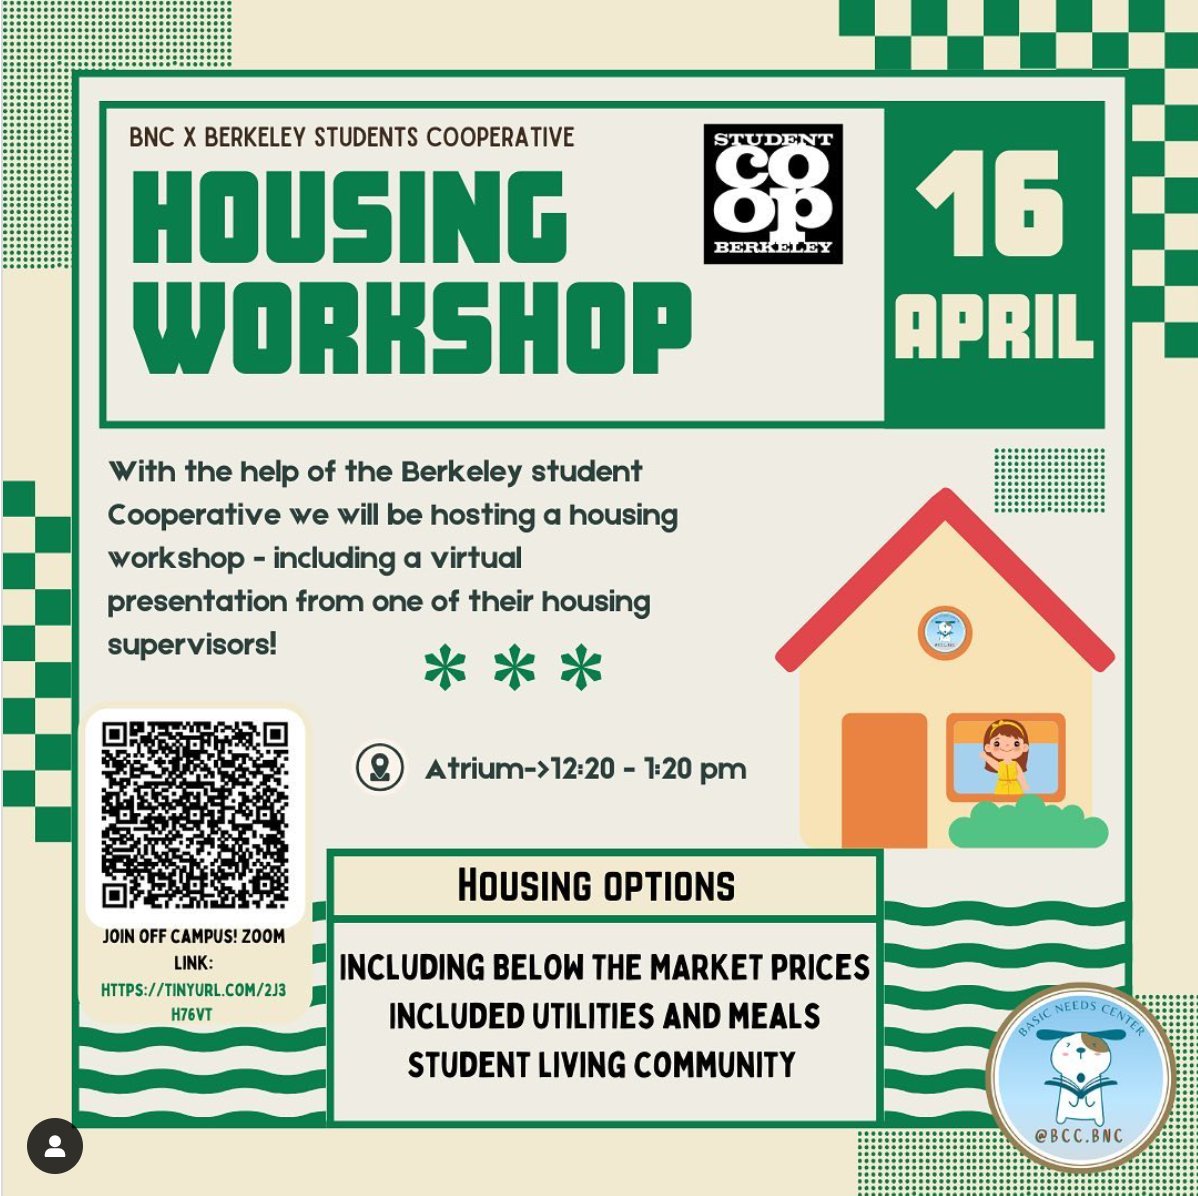 🏠HOUSING WORKSHOP!
As part of @berkeleycc #BasicNeeds Awareness Week, they will host a hybrid workshop next Tuesday April 16th! 

You may attend in the atrium or virtually by accessing the zoom link in the QR🔽
bit.ly/4cT8a6S

✨Come learn about housing options!